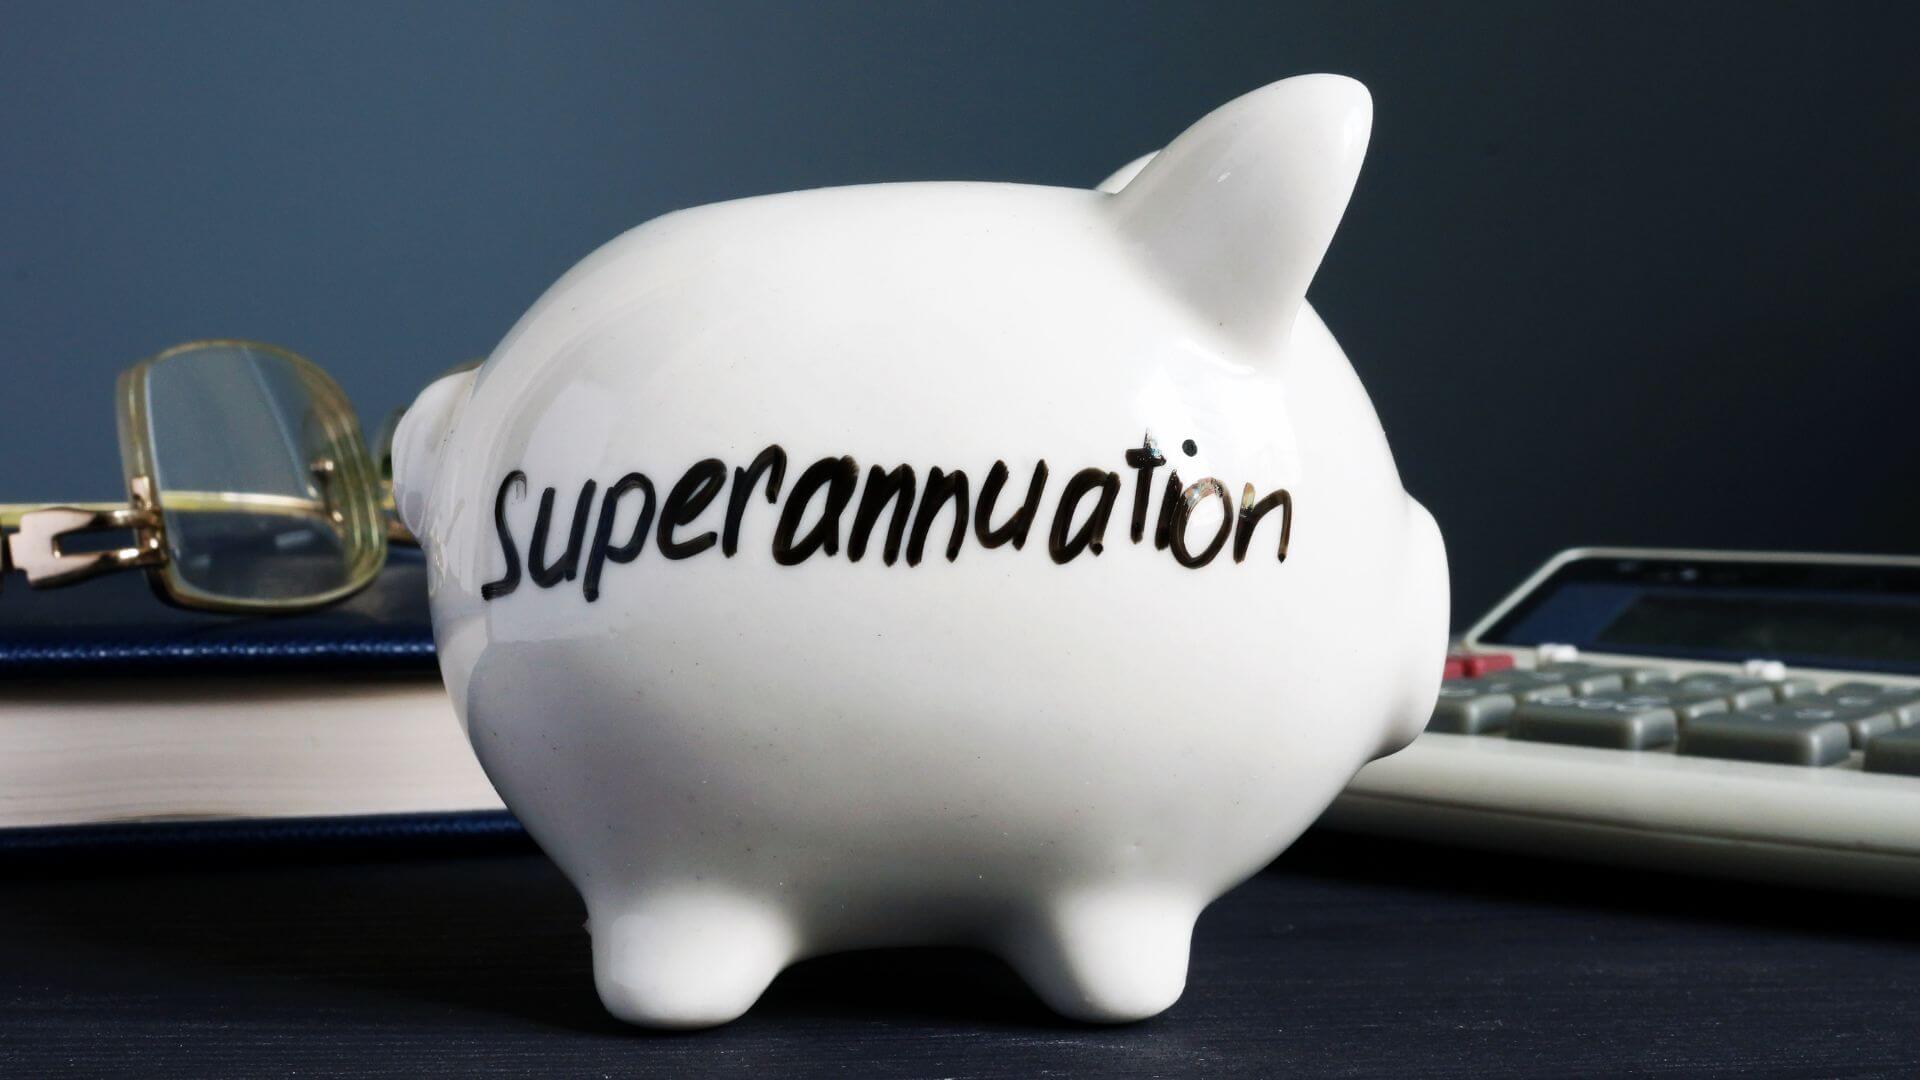 A piggy bank labeled "superannuation" sits in the foreground on a dark blue surface, symbolizing savings for retirement. Behind it, a pair of eyeglasses and a calculator atop a leather-bound book suggest financial planning and calculation, emphasizing the importance of preparing for future financial security.